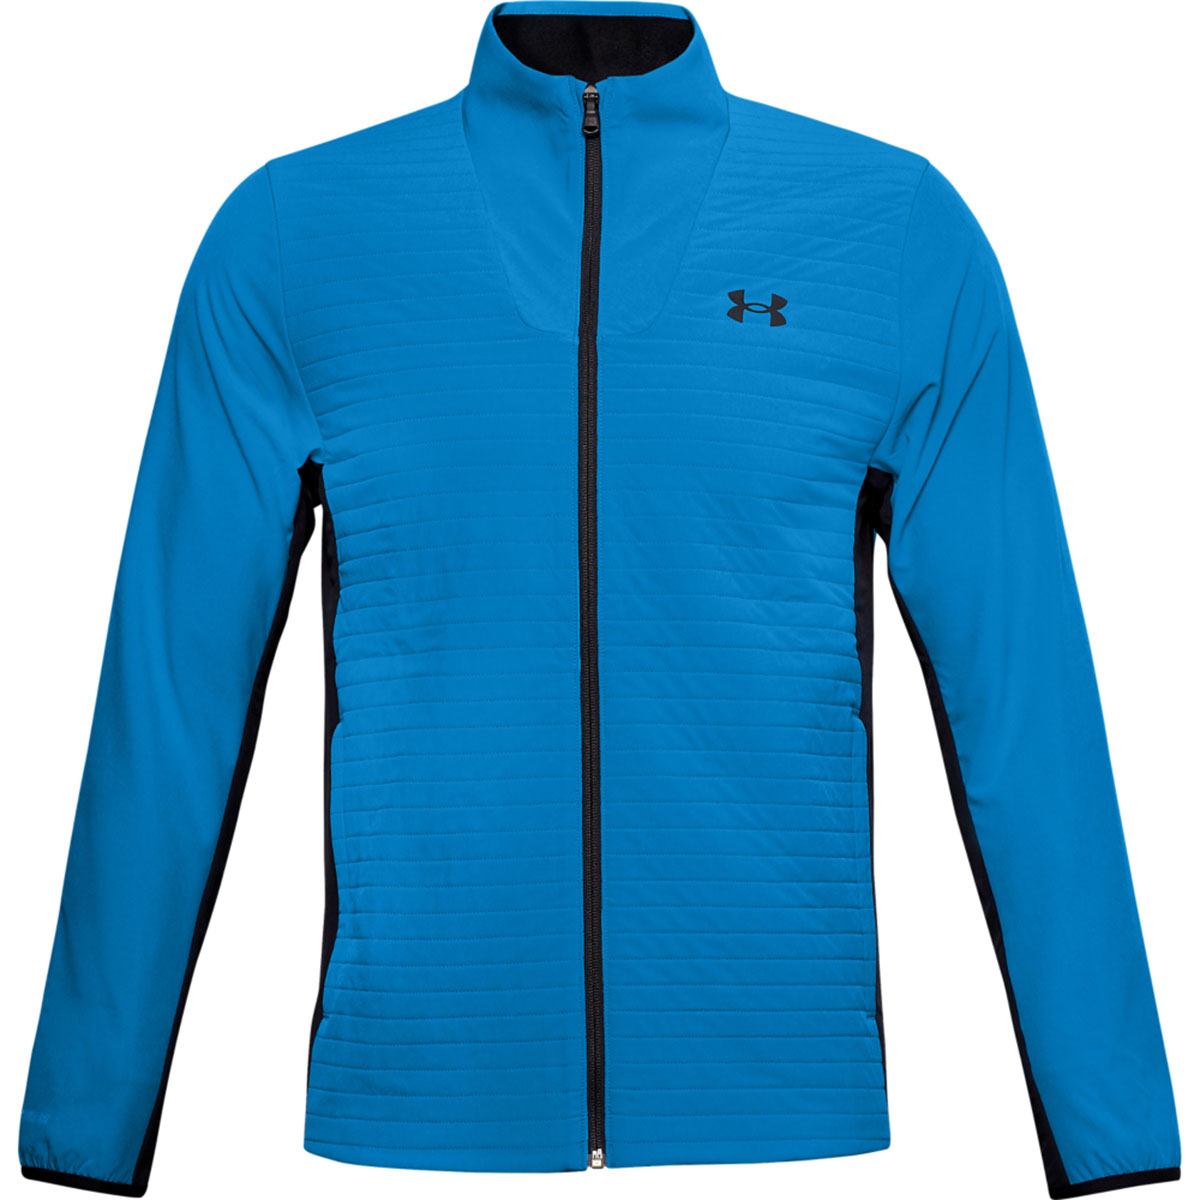 Under Armour Storm Revo Jacket from american golf